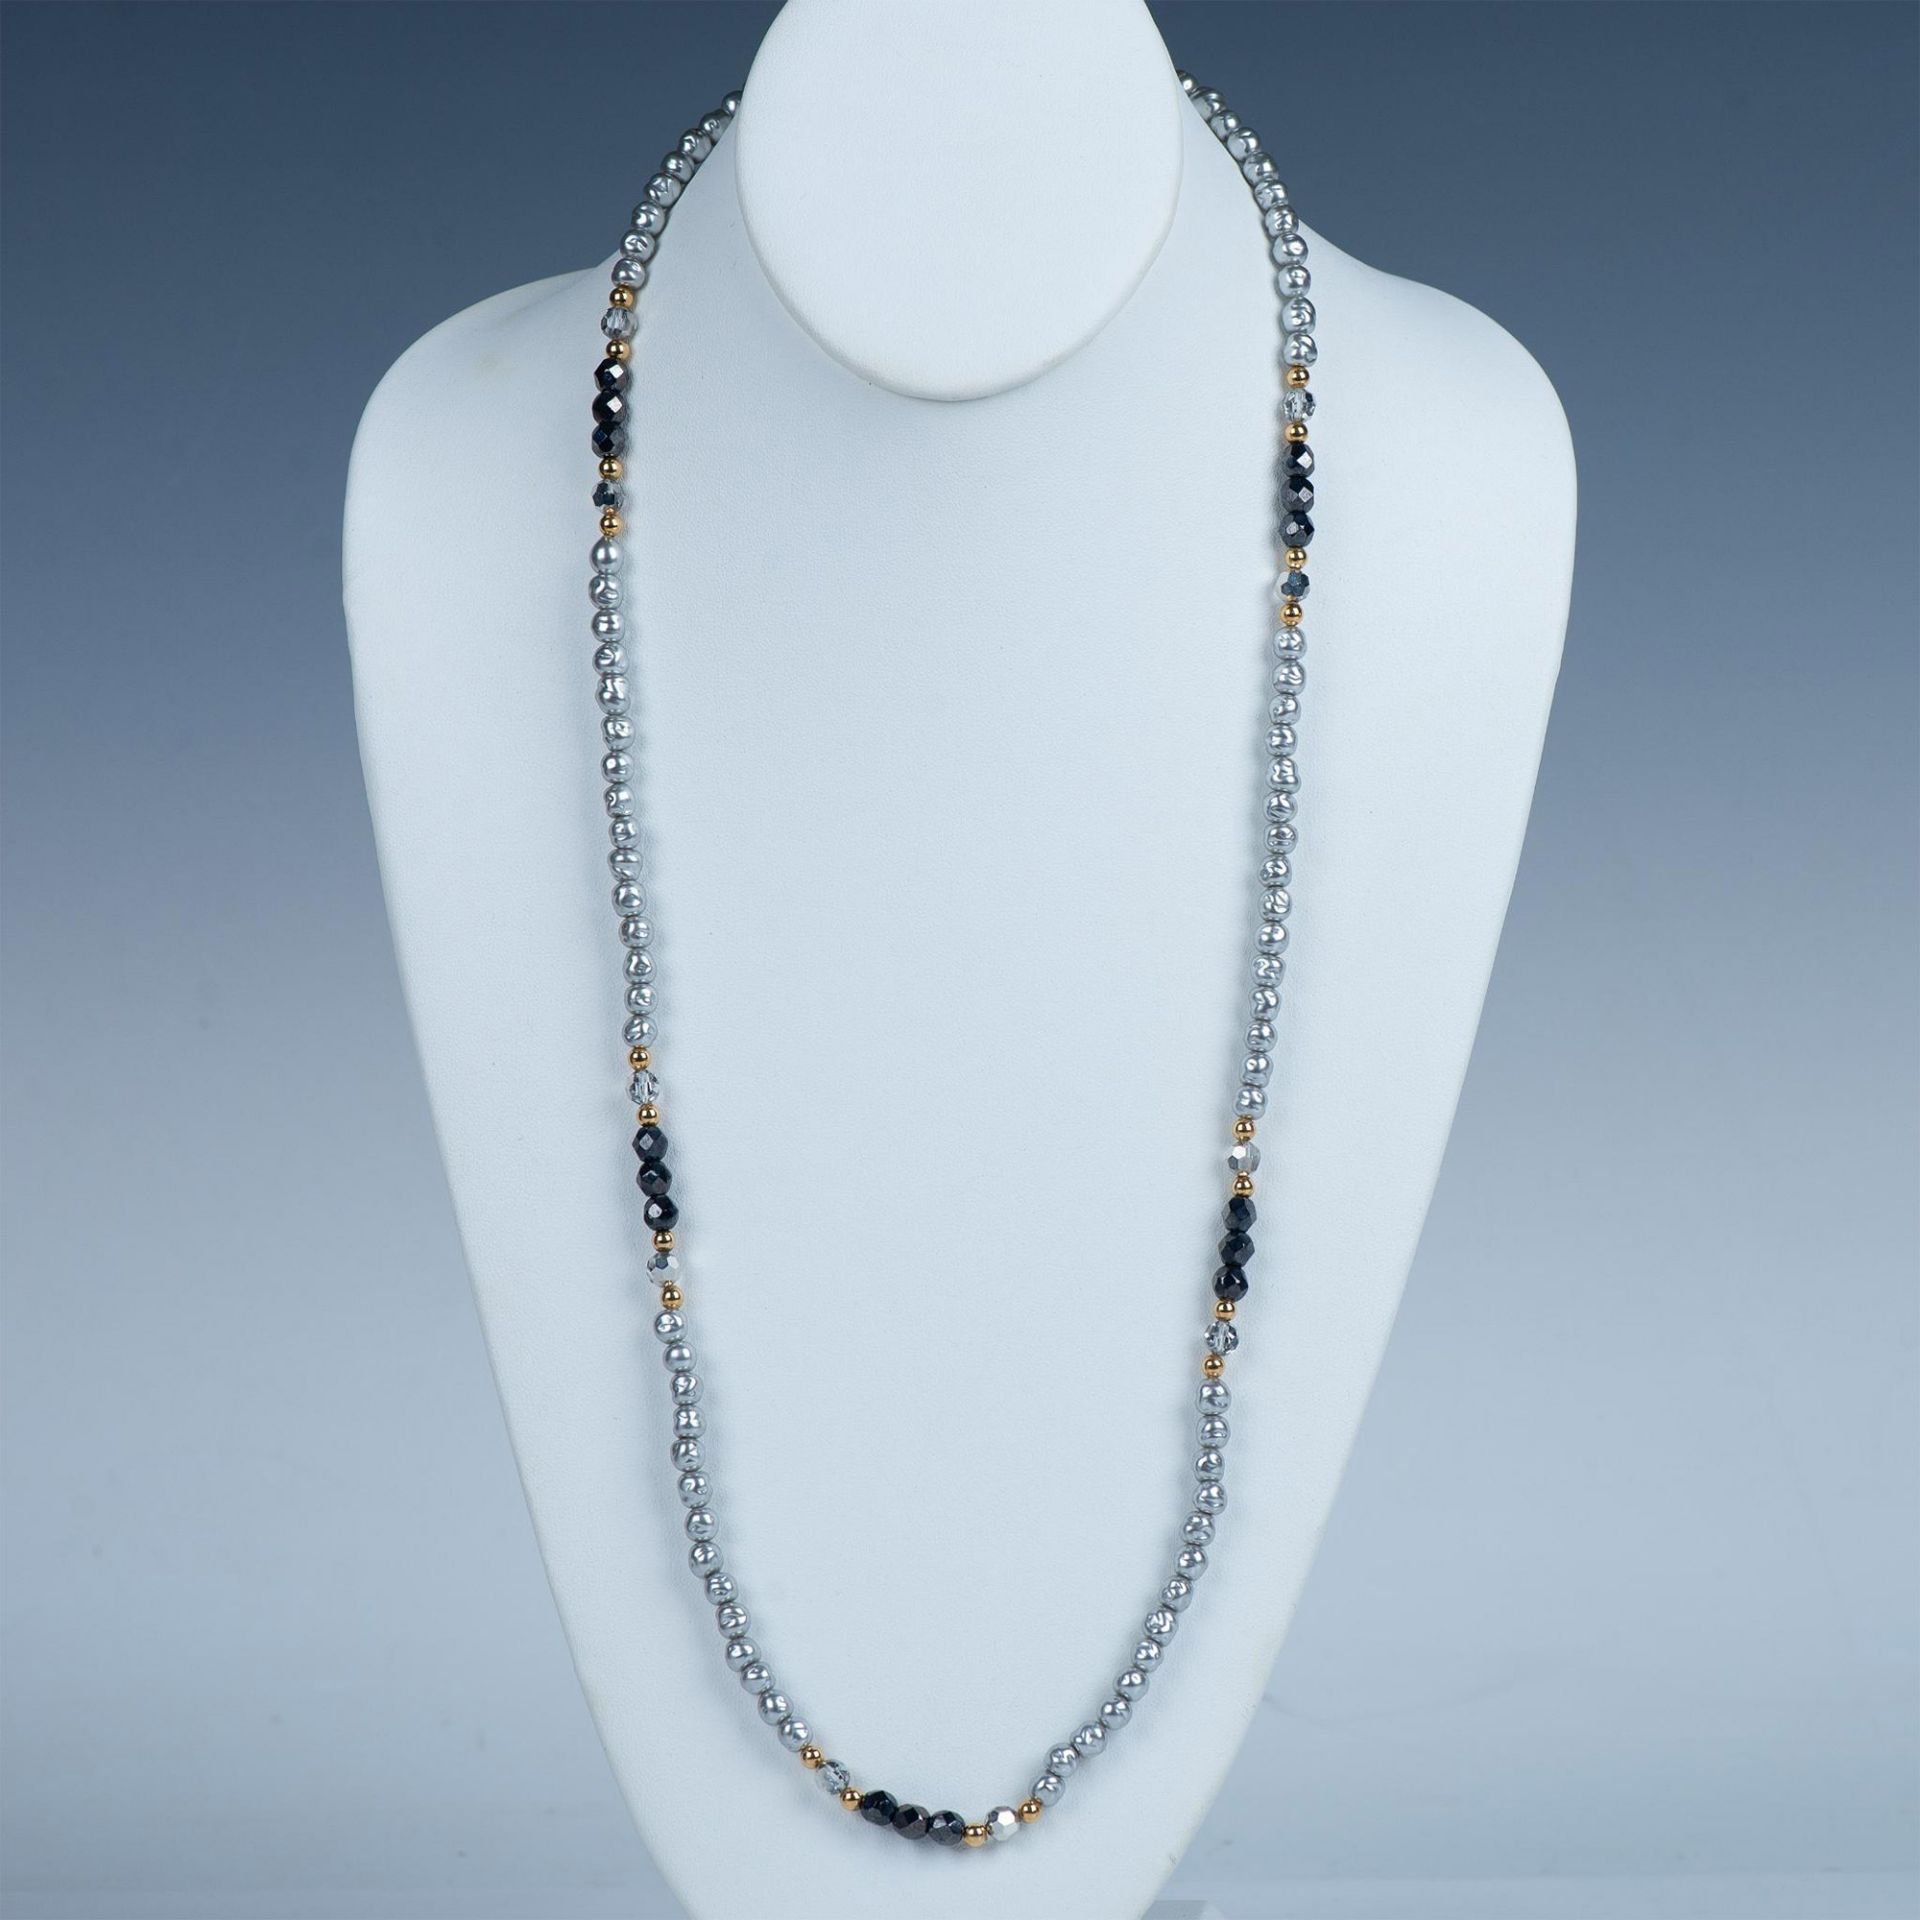 Classy Faux Pearl Strand Necklace - Image 4 of 8